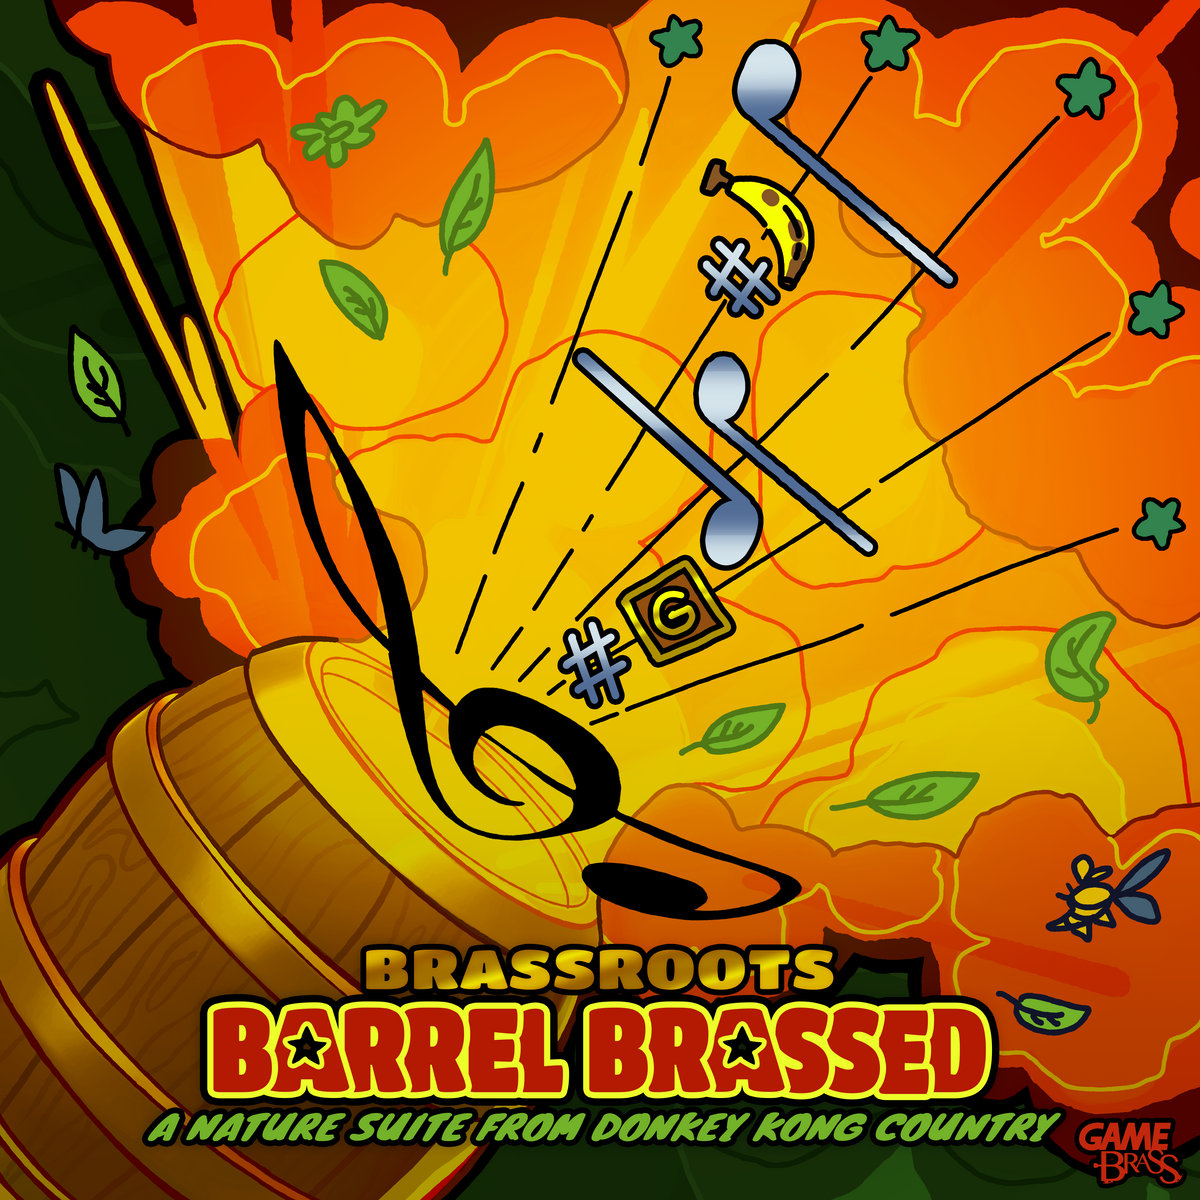 Brassroots: Barrel Brassed – A Nature Suite from Donkey Kong Country